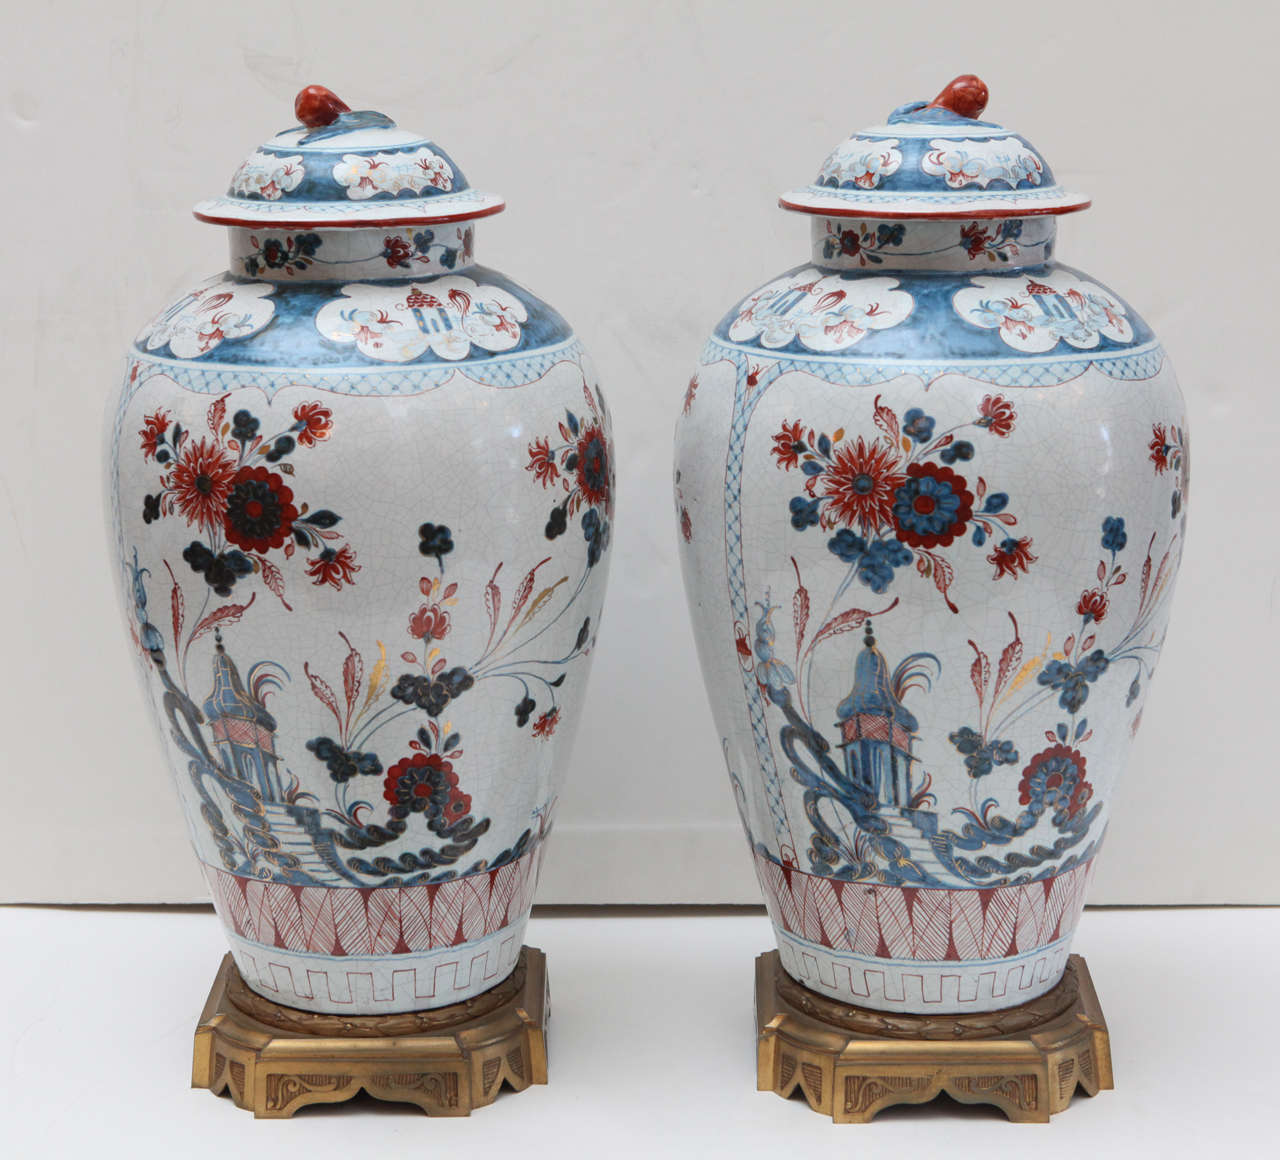 A pair of left and right, lidded, Venetian-style, parcel gilt, Delft urns mounted on gilt bronze bases.